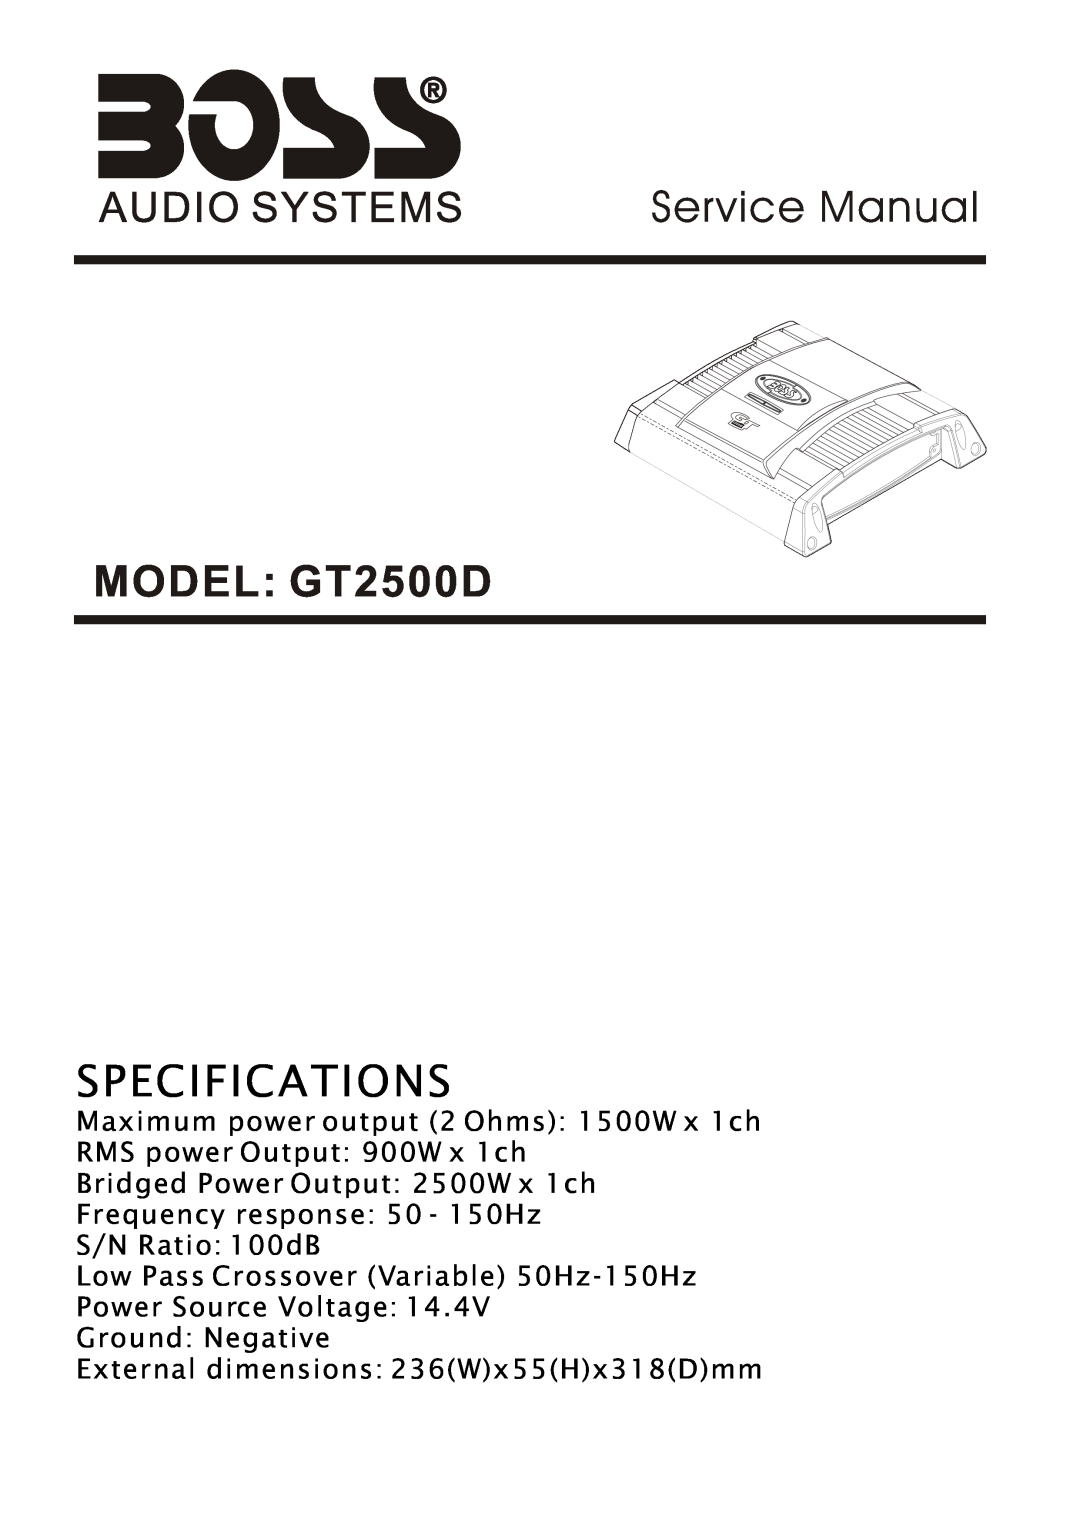 Boss Audio Systems service manual MODEL GT2500D, Specifications, Maximum power output 2 Ohms 1500W x 1ch 